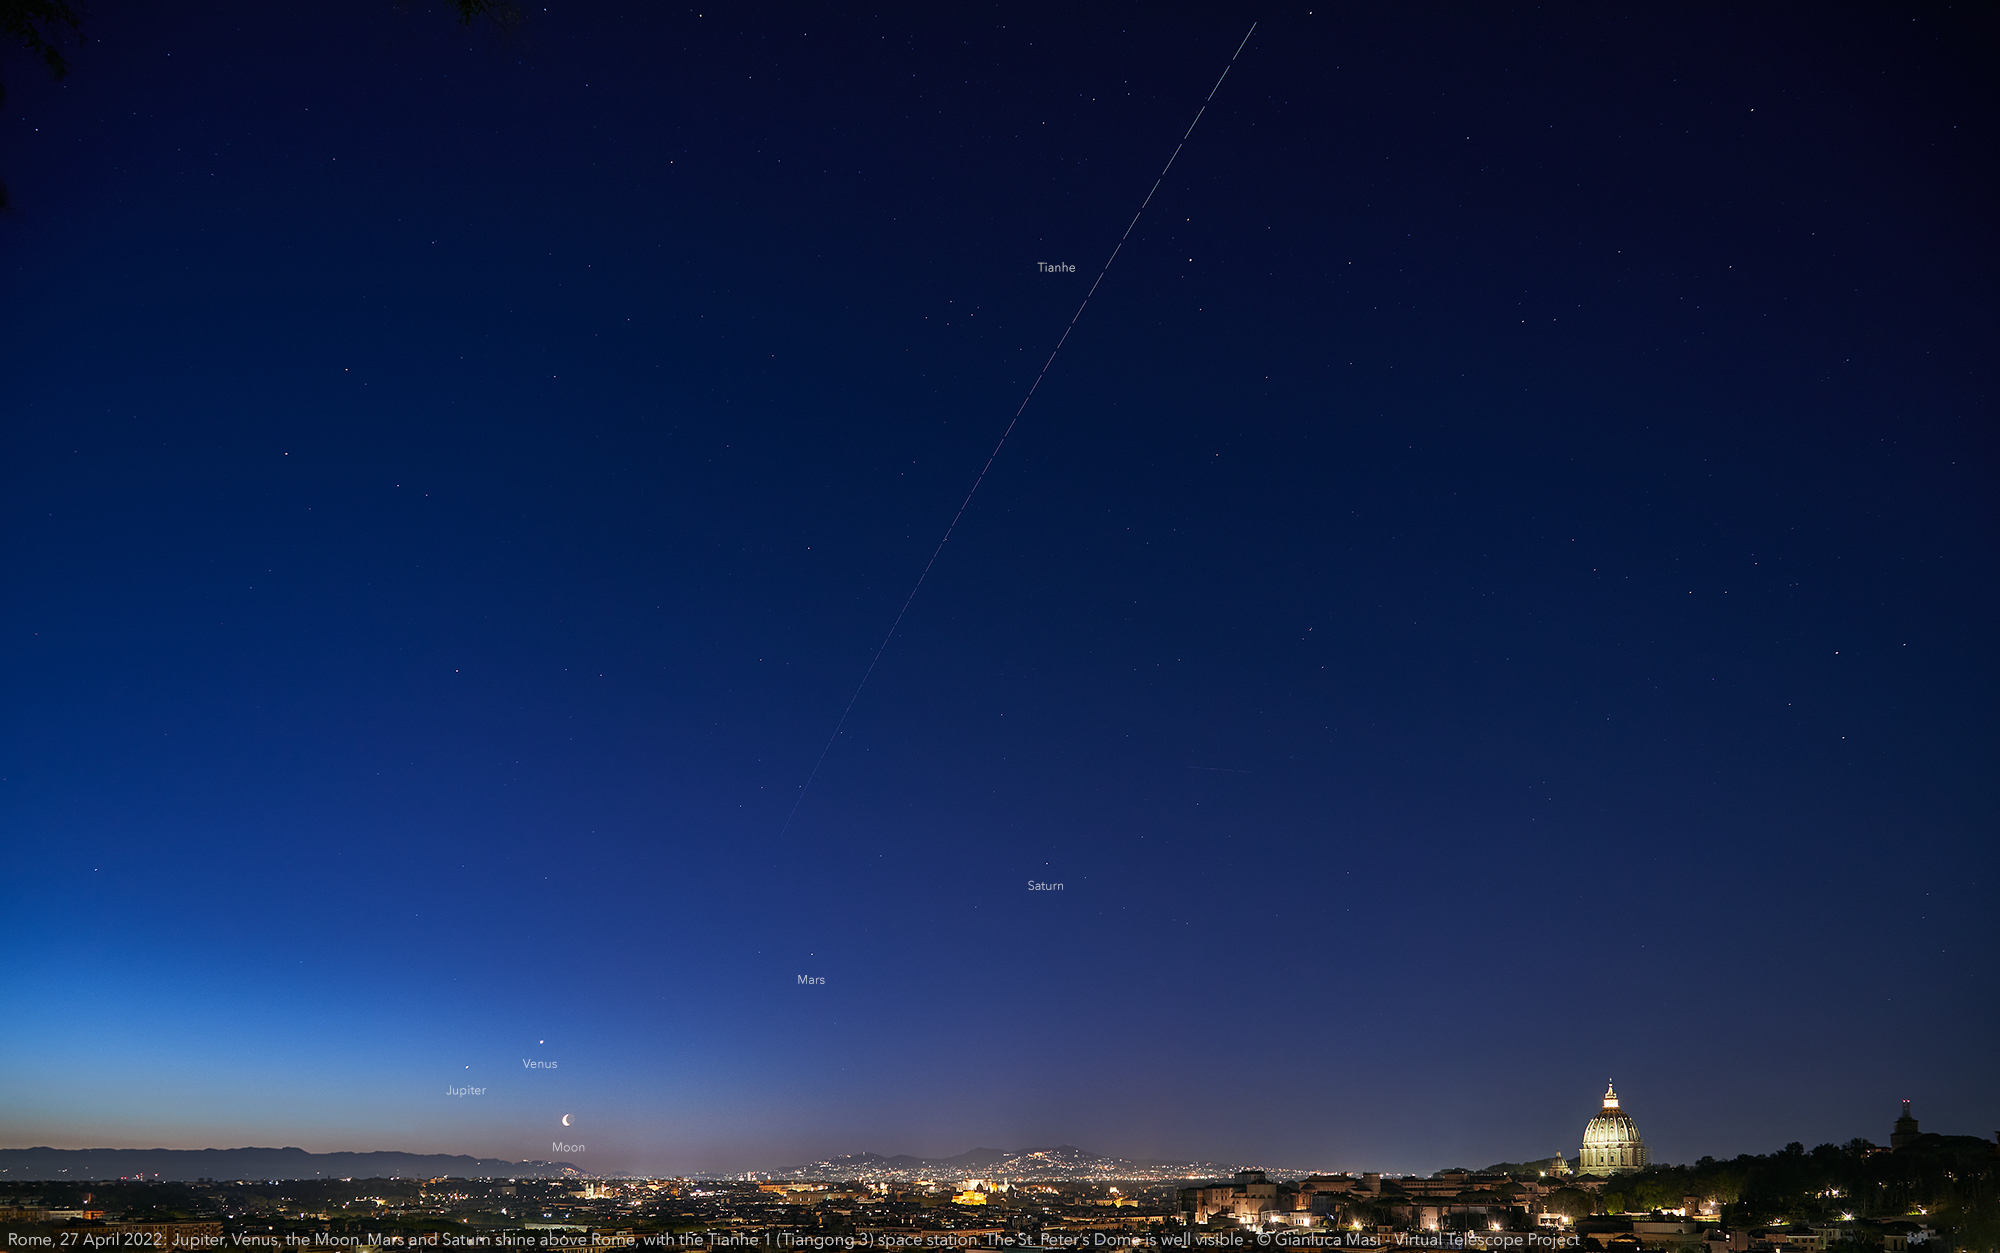 Planets Jupiter, Venus, Mars, Saturn and the Moon shine above Rome at dawn, while the Tianhe-1 Chinese space station crosses the sky. 27 Apr. 2022.